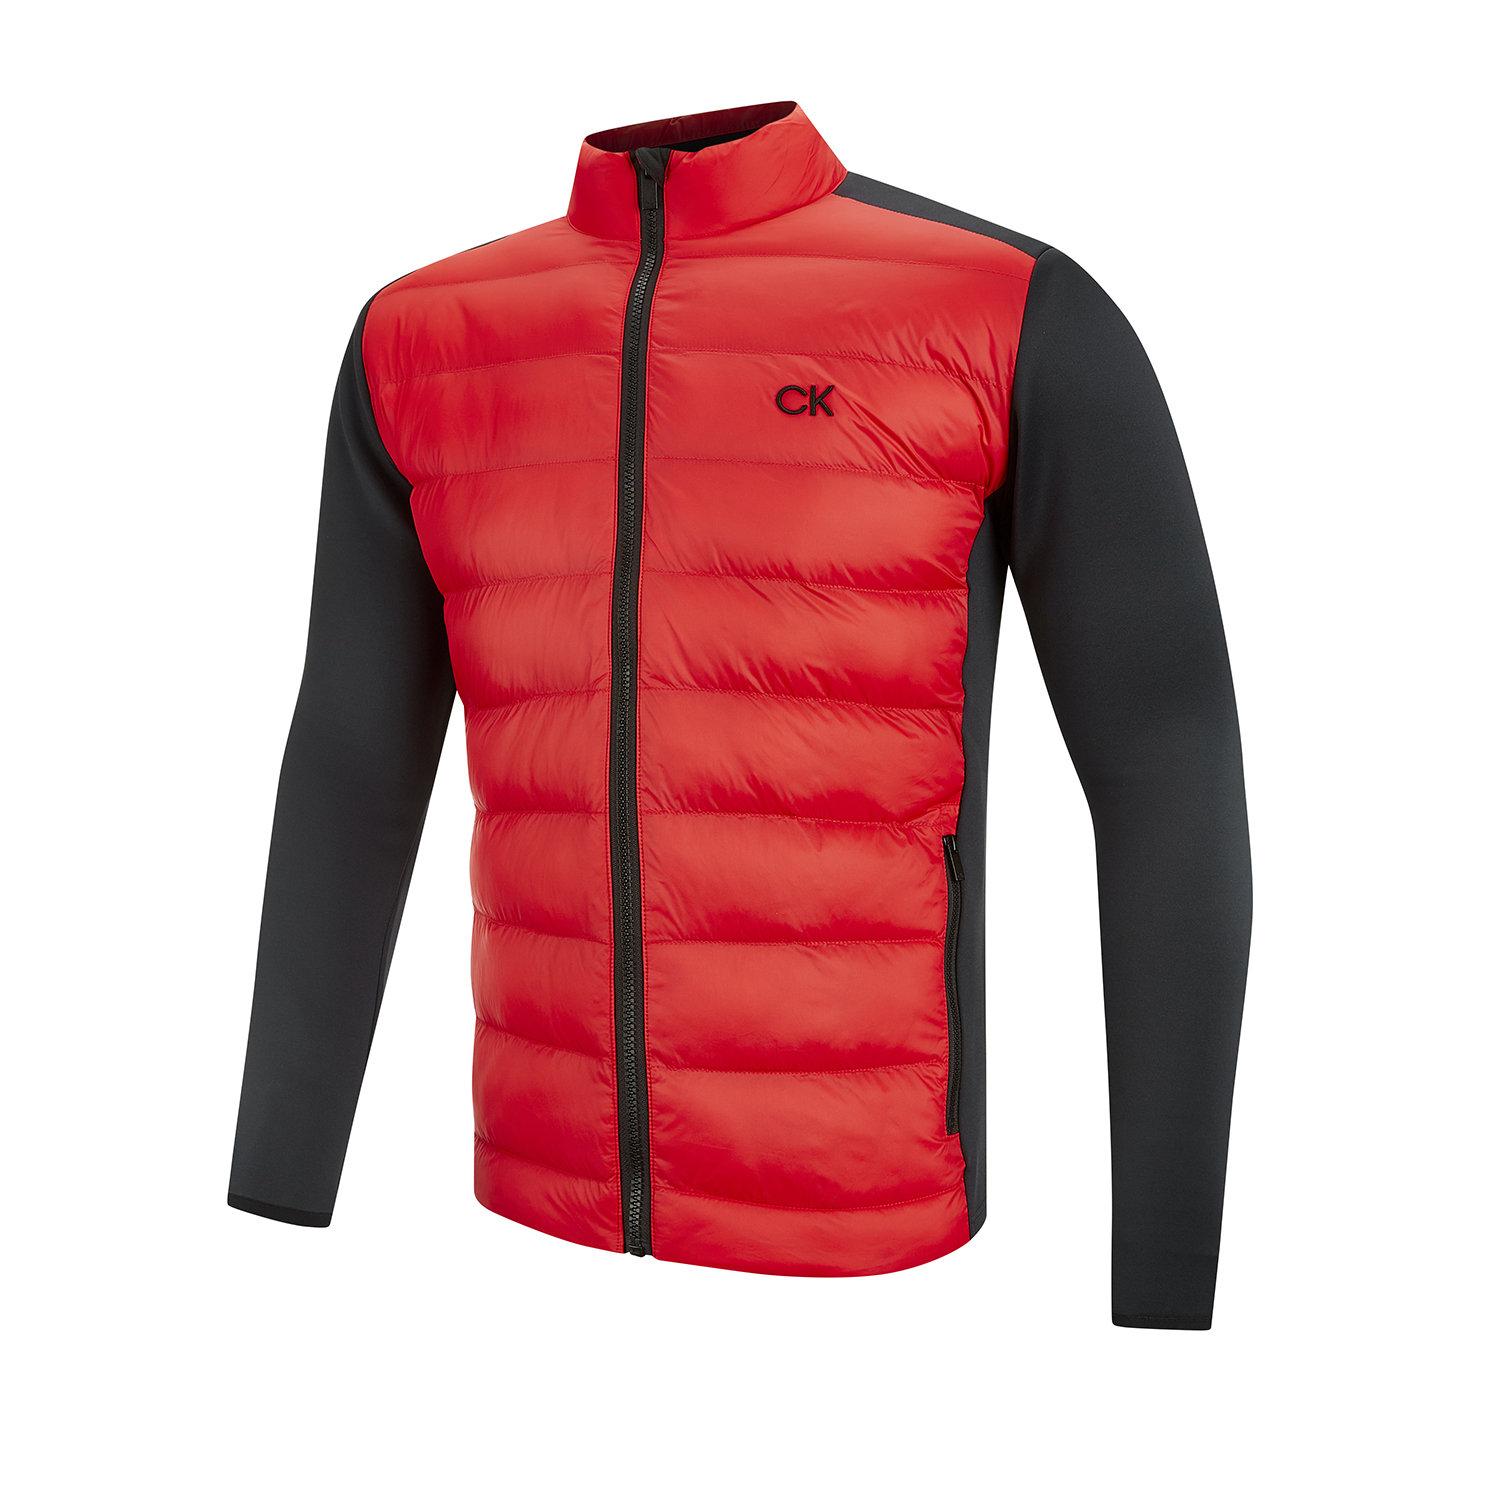 Calvin Klein Clo Golf | & | County Golf | Hybrid Vests Sale Golf Jacket Gilets Jackets, from Quilted